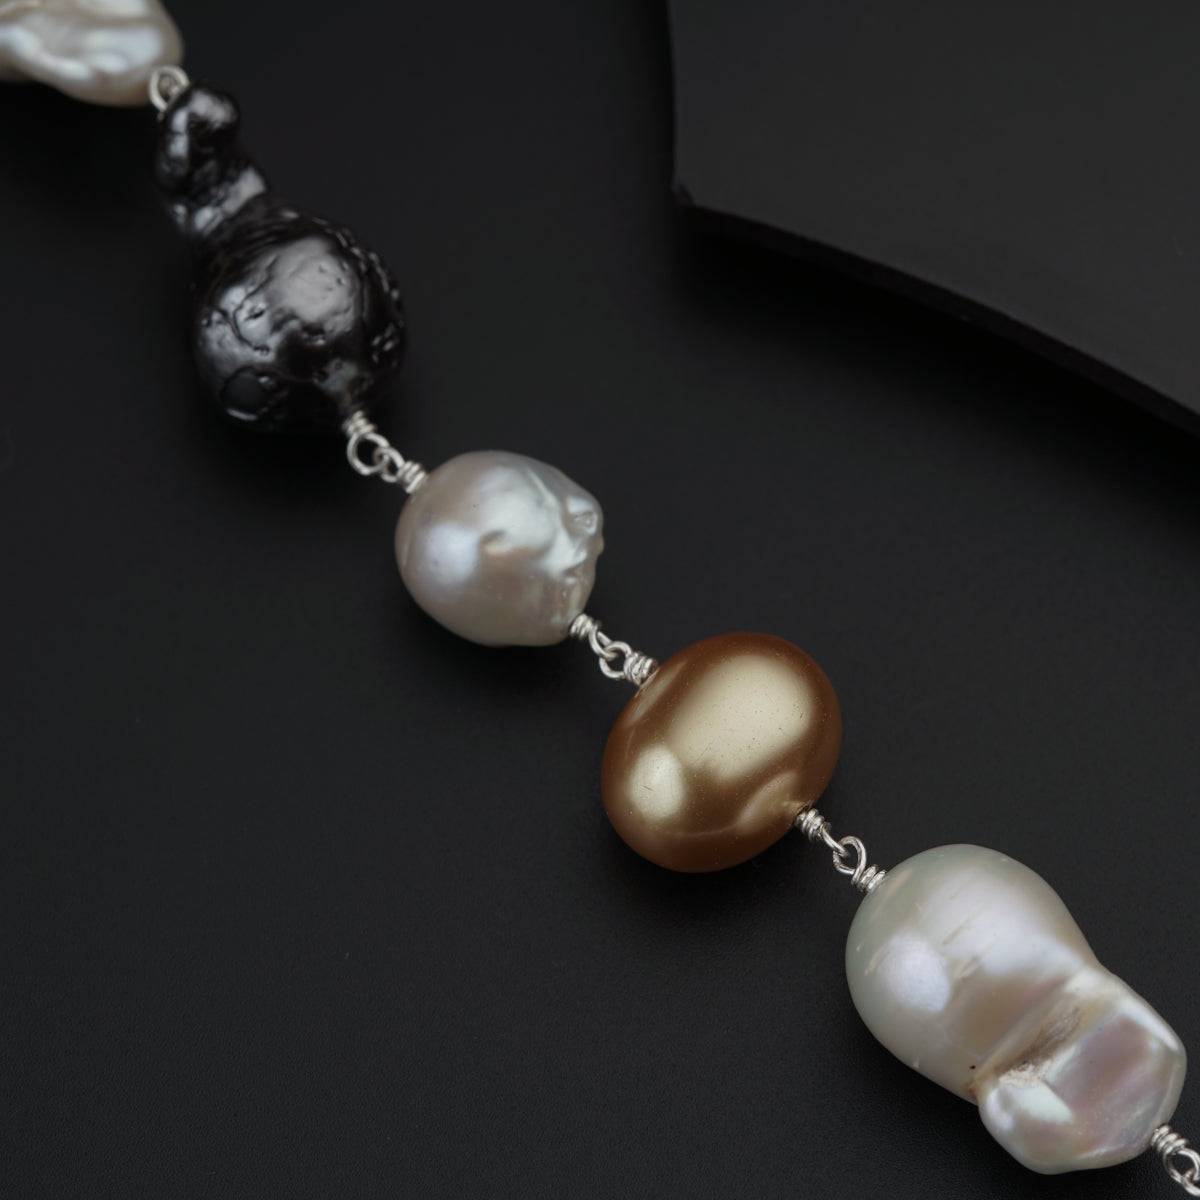 a black and white necklace with pearls on it